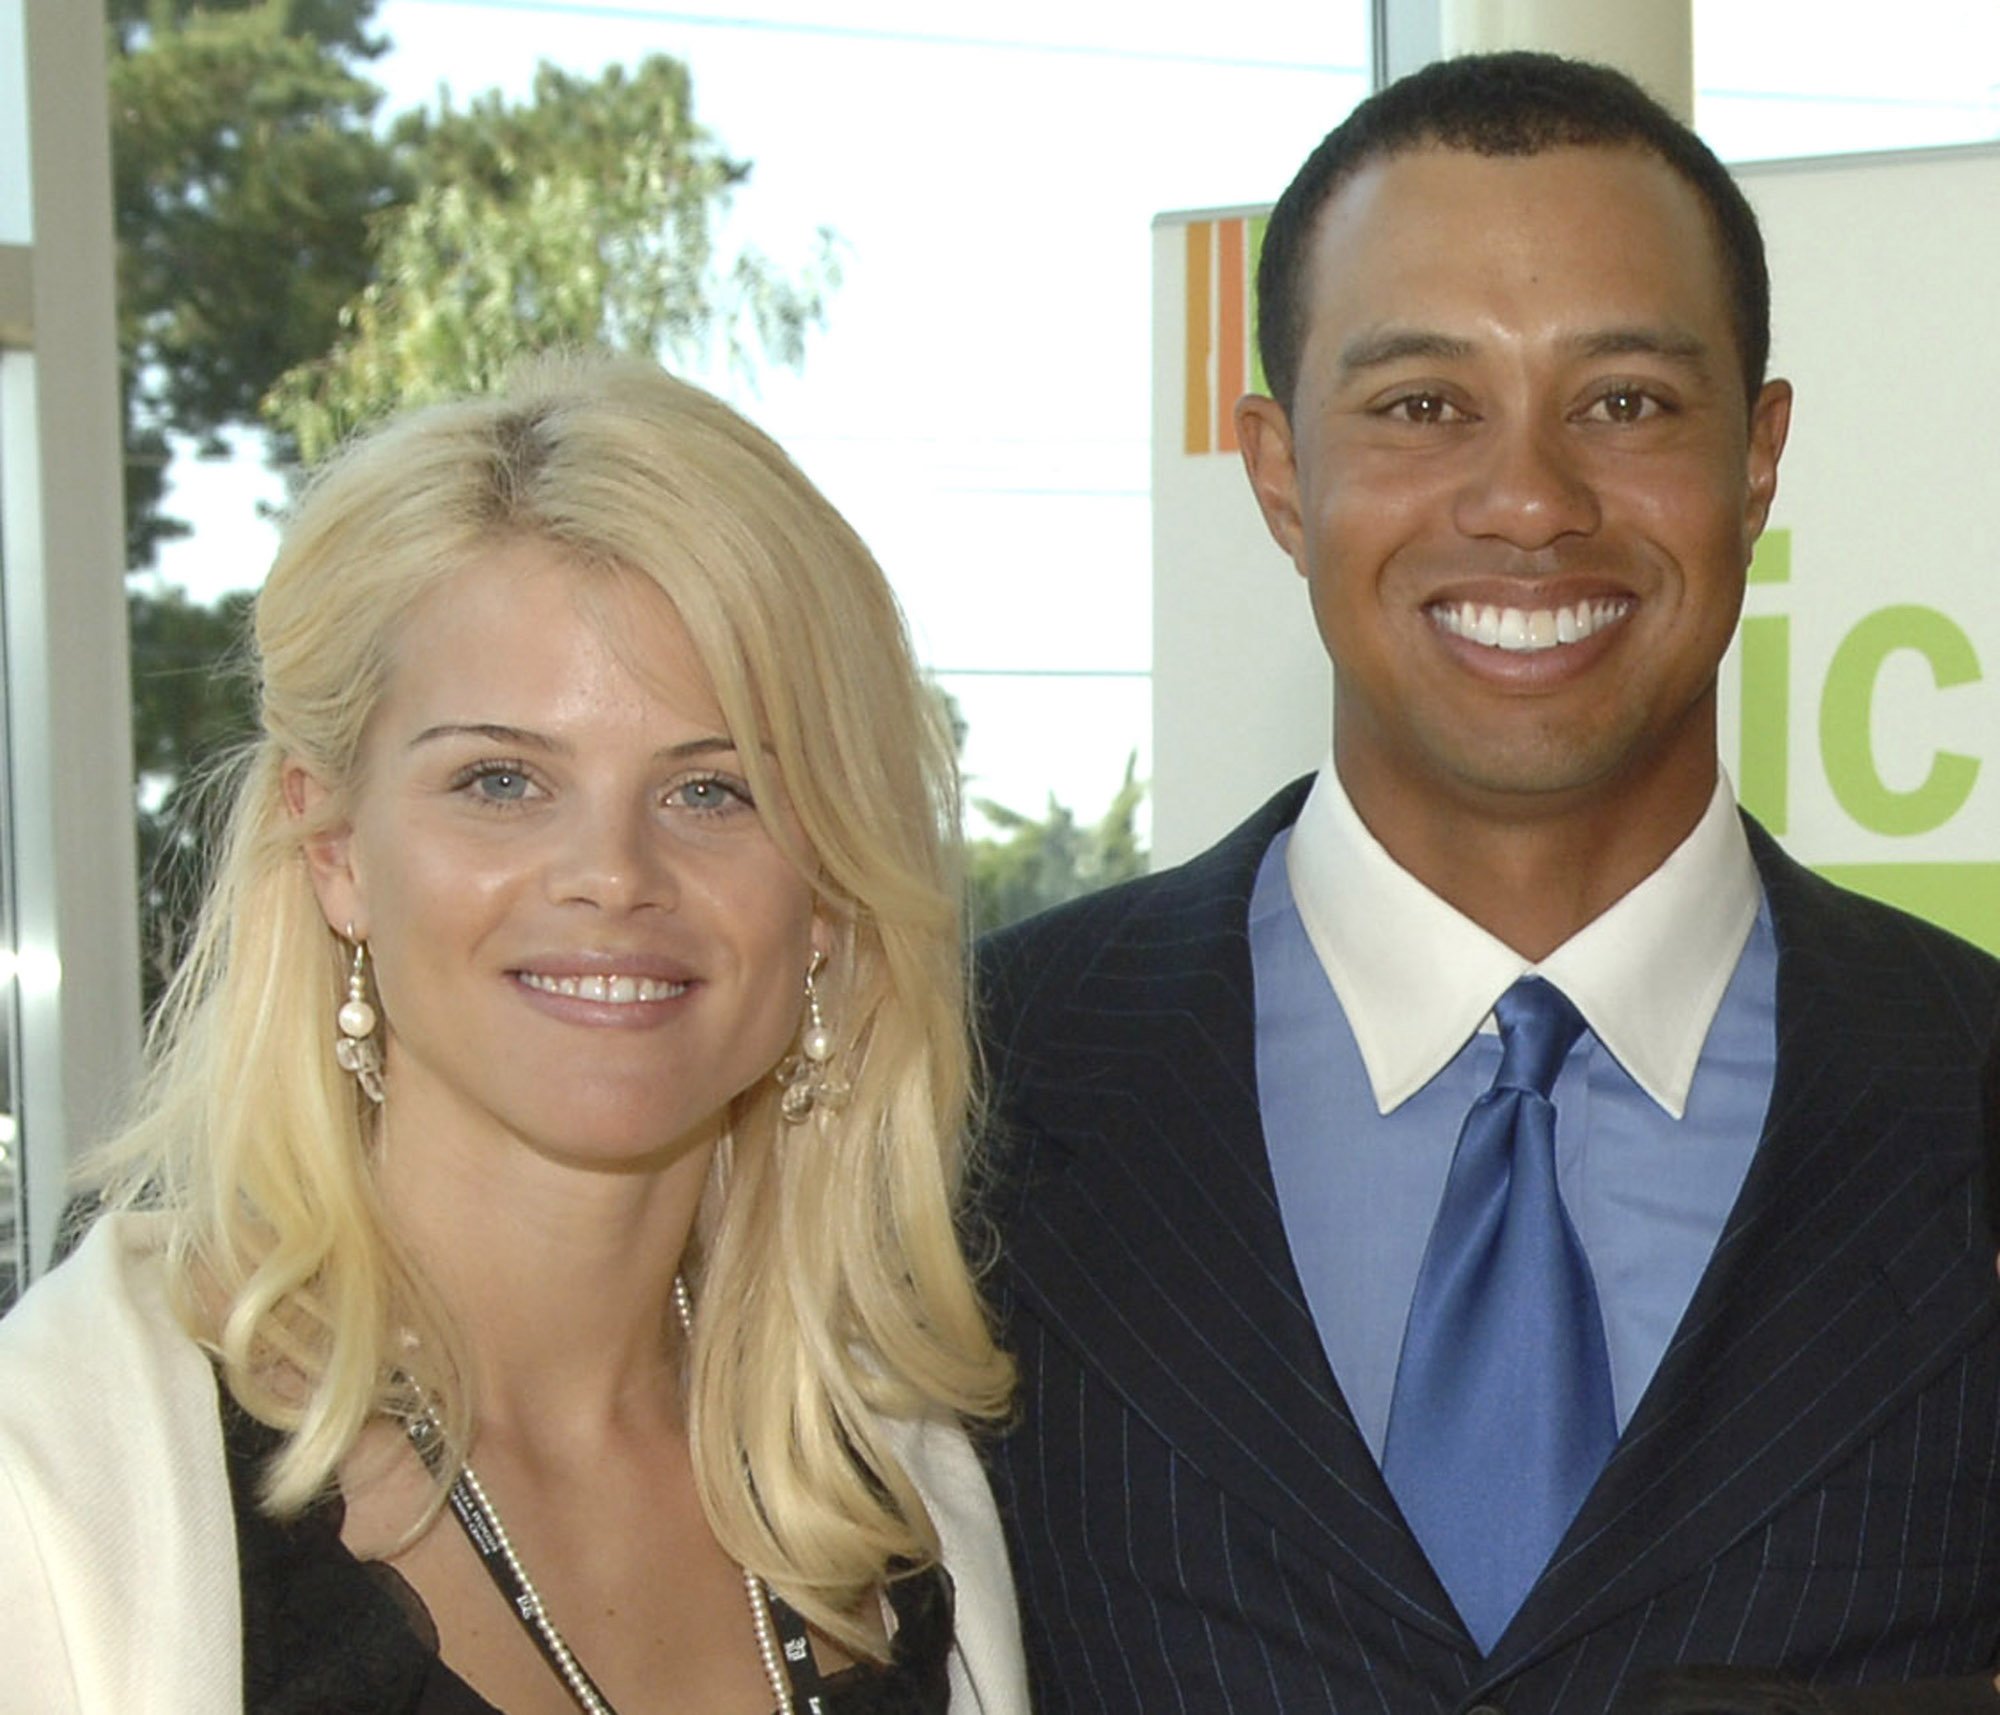 Who Is Tiger Woods’ Ex-Wife Elin Nordegren and Why Did They Get Divorced?